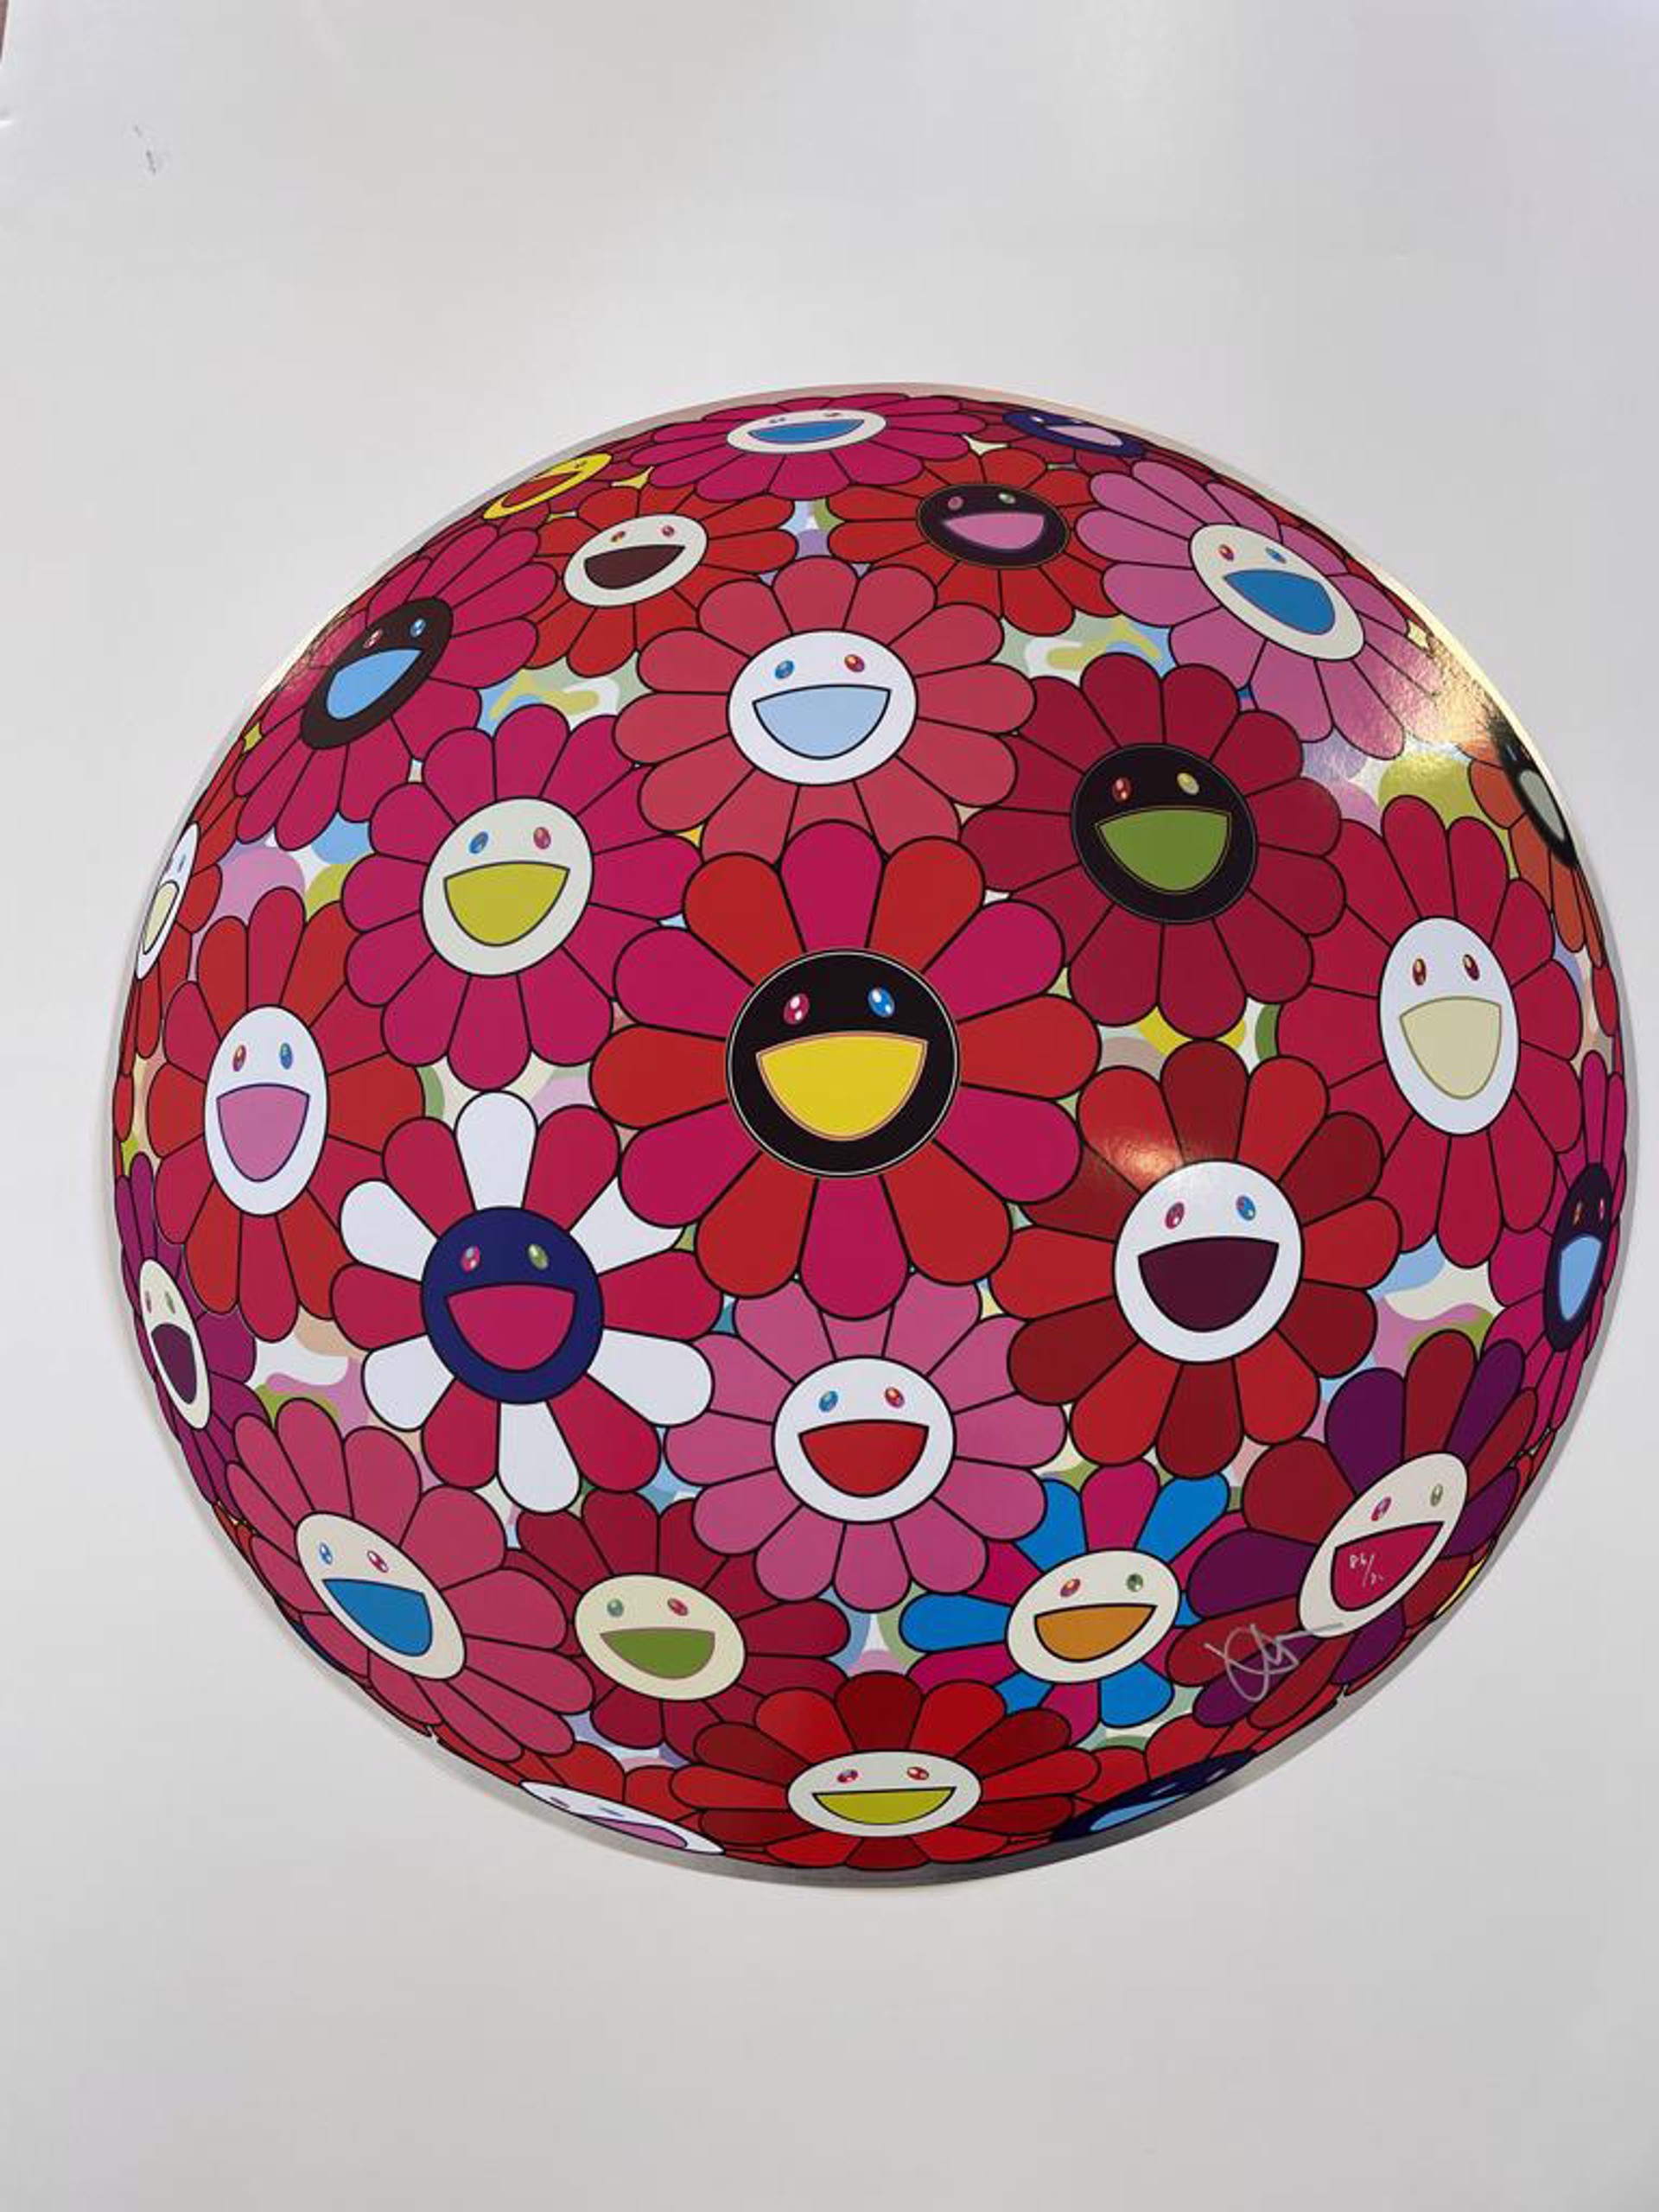 Letters to Picasso by Takashi Murakami